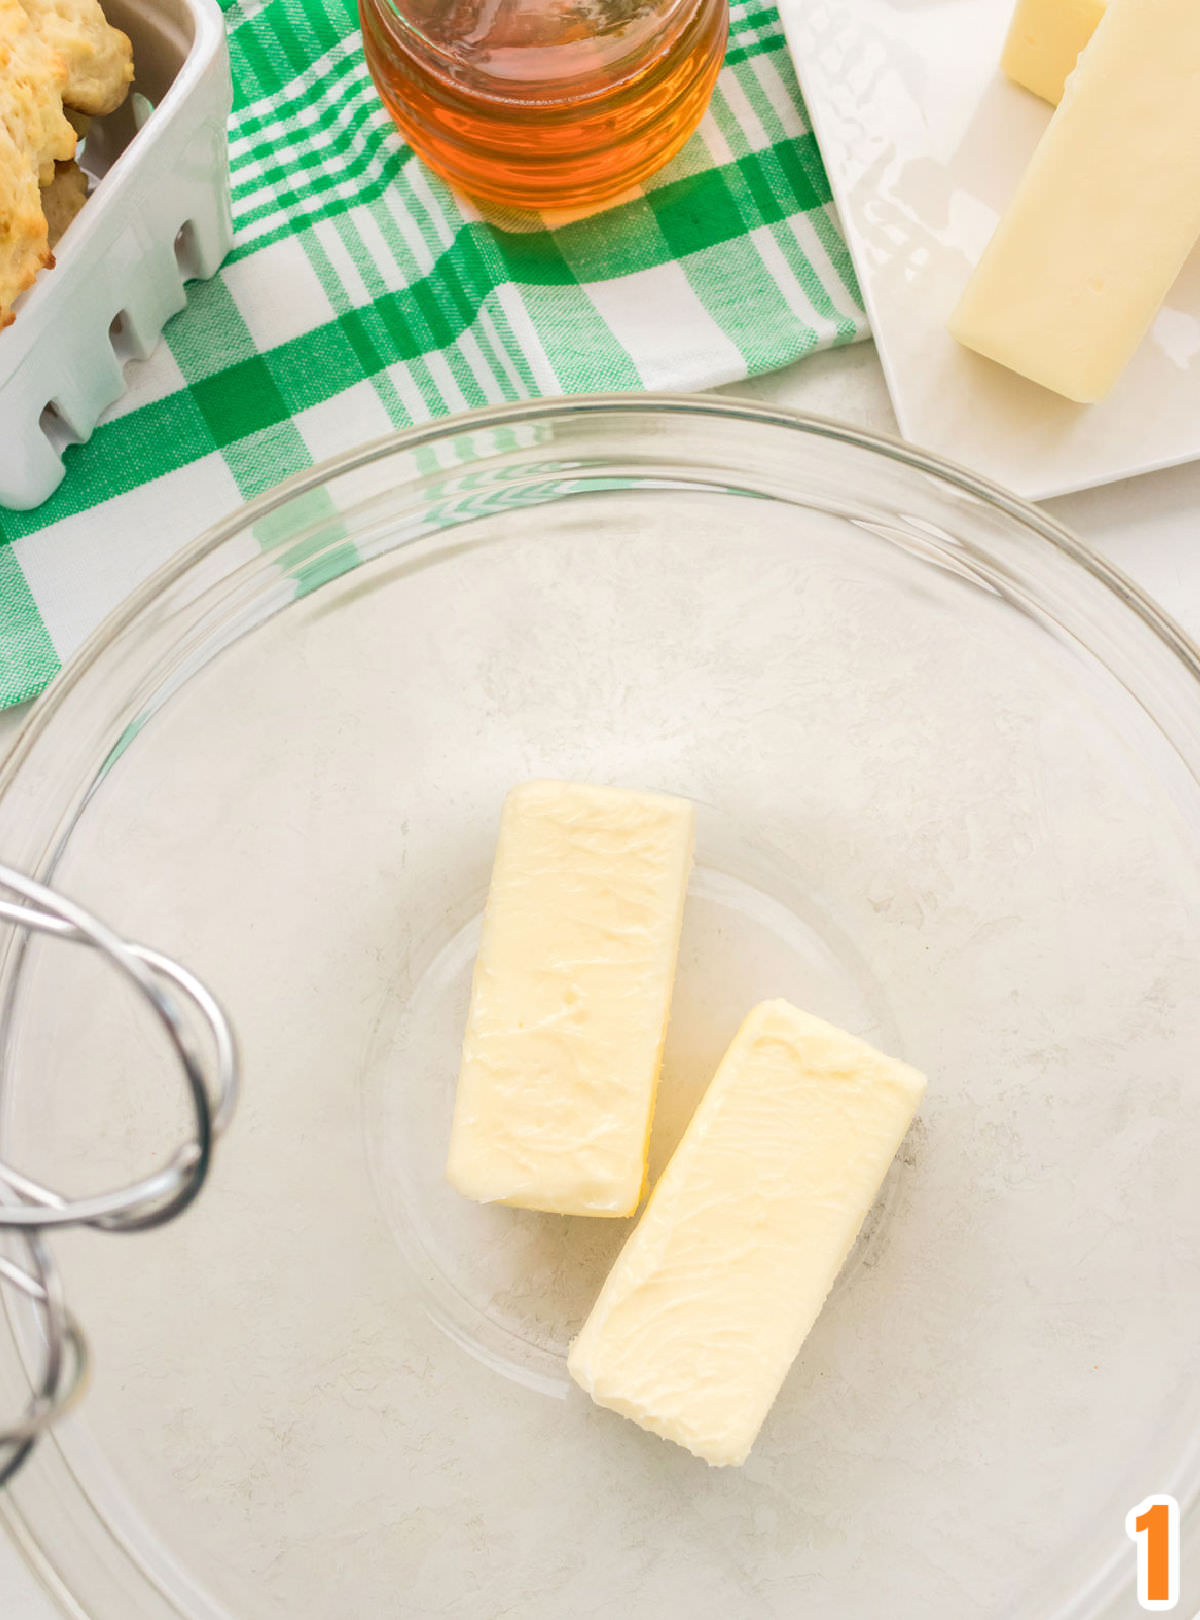 Overhead shot of a clear glass bowl with two sticks of butter in it.